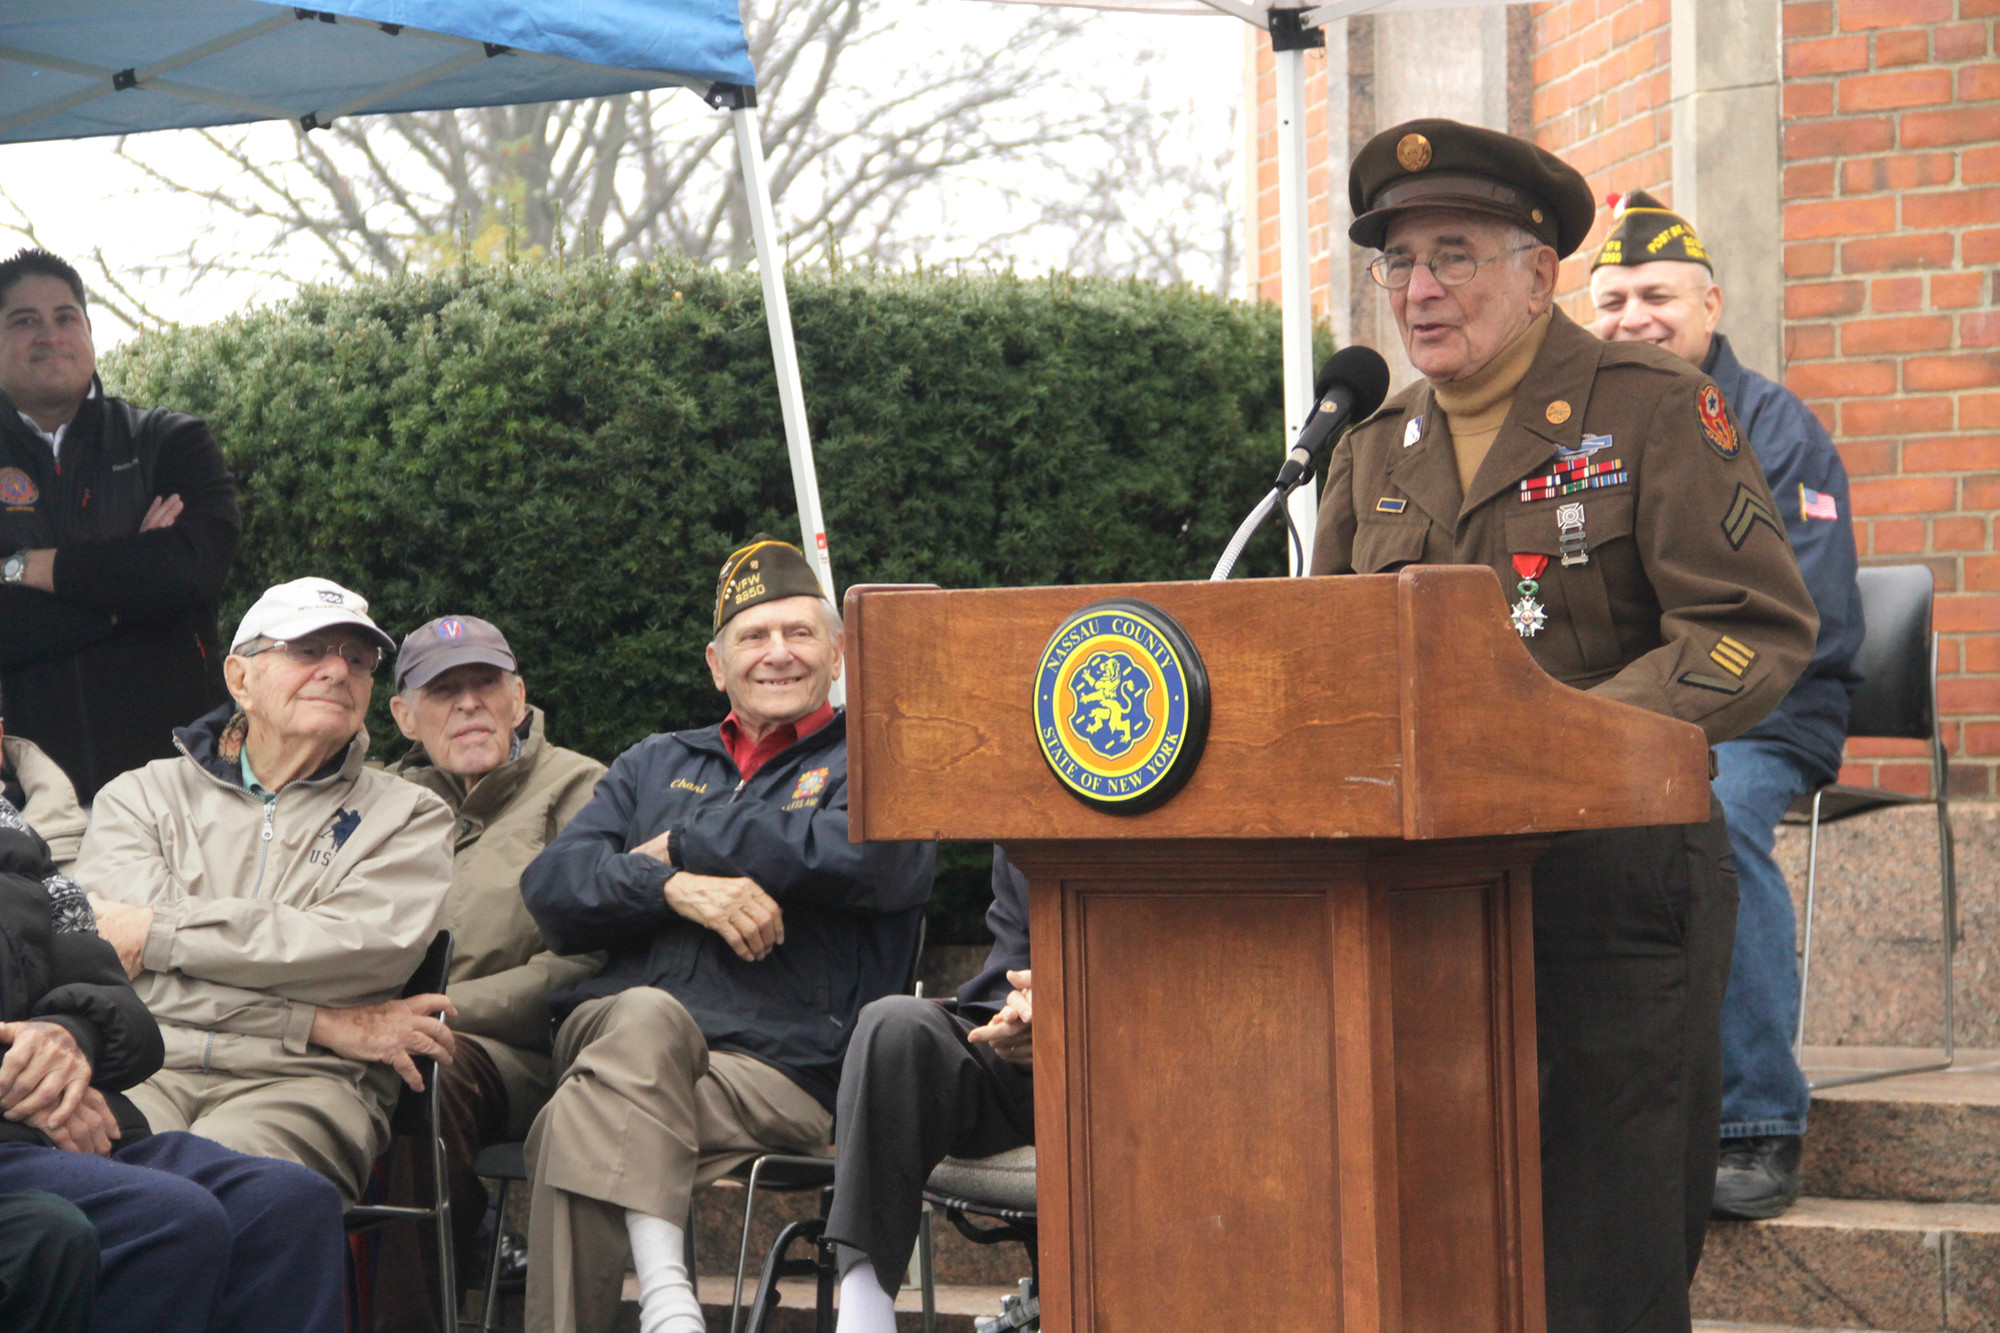 Veteran David Marshall, a Baldwinite whose most vivid memory of the historic Battle of the Bulge was the frigid Belgian winter, spoke at the unveiling.event on Dec. 23.